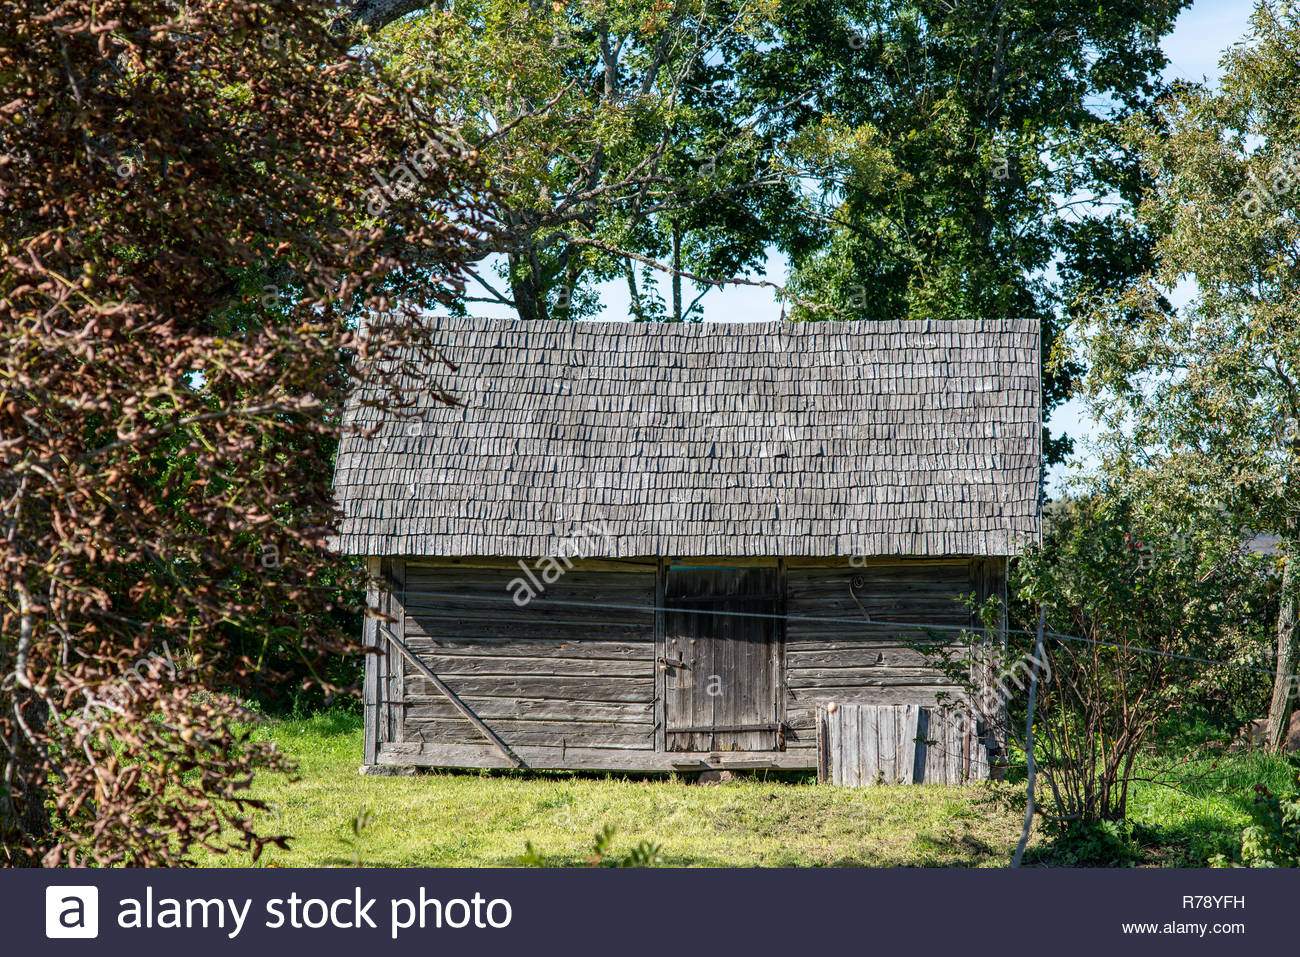 old wooden countryside house architecture details and elements of construction R78YFH